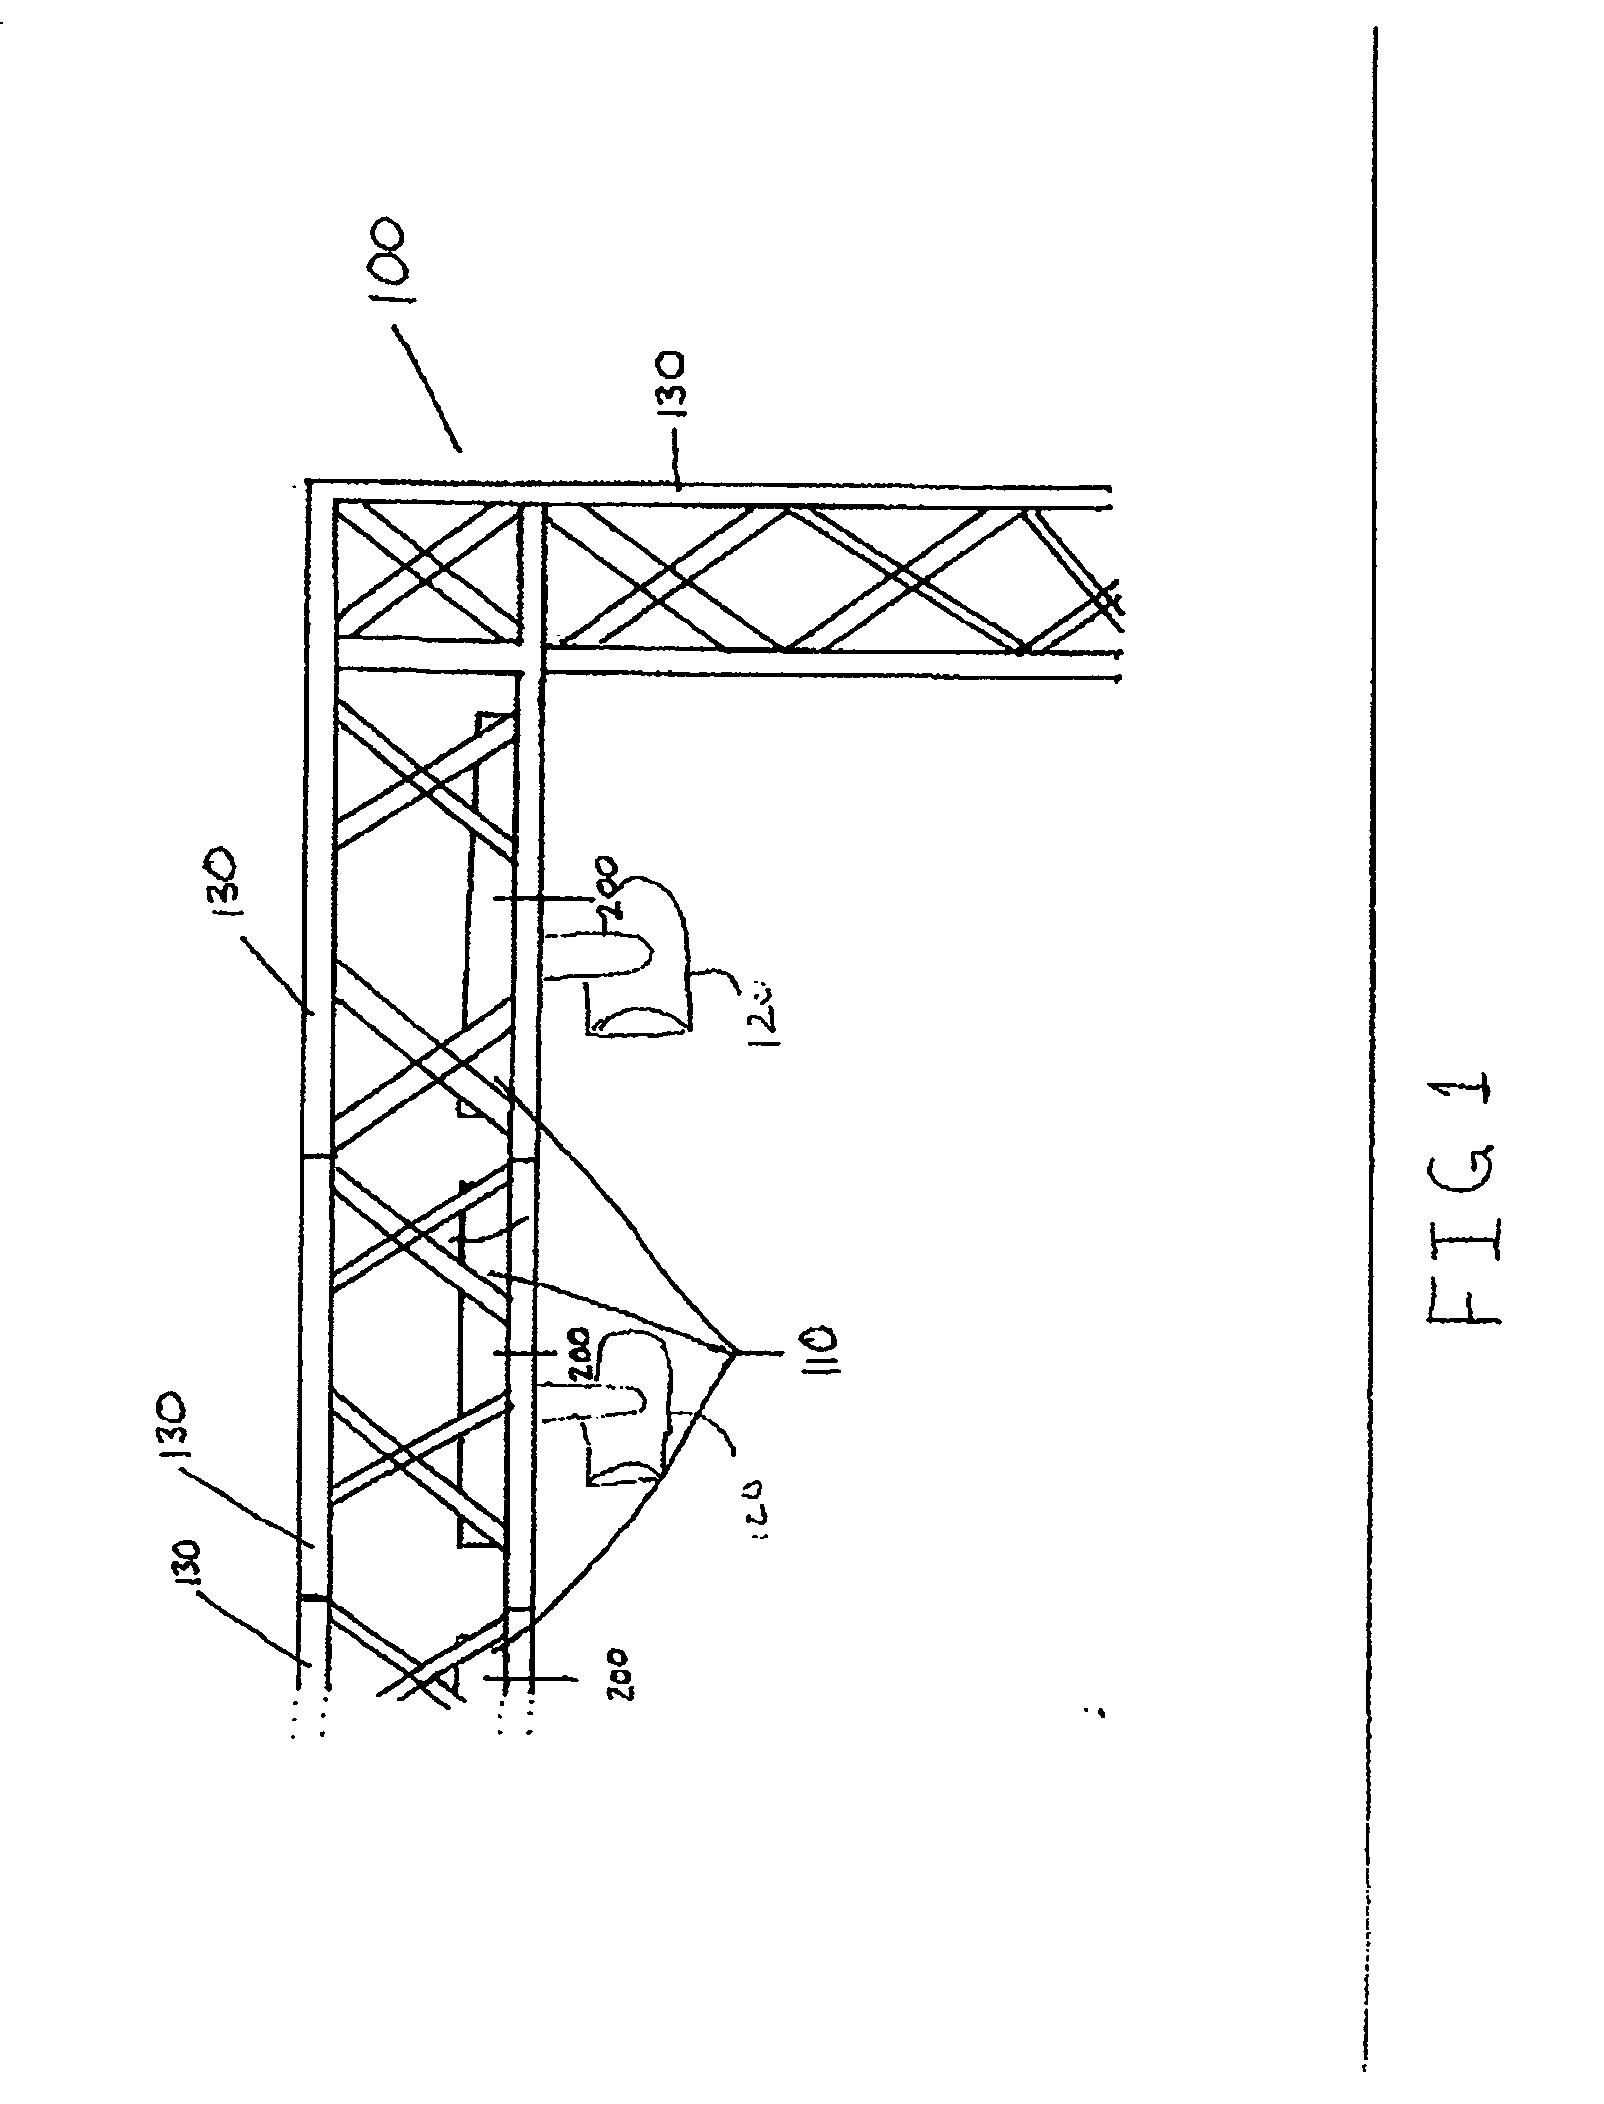 Systems and Methods for Distributing Power and Data in a Lighting System